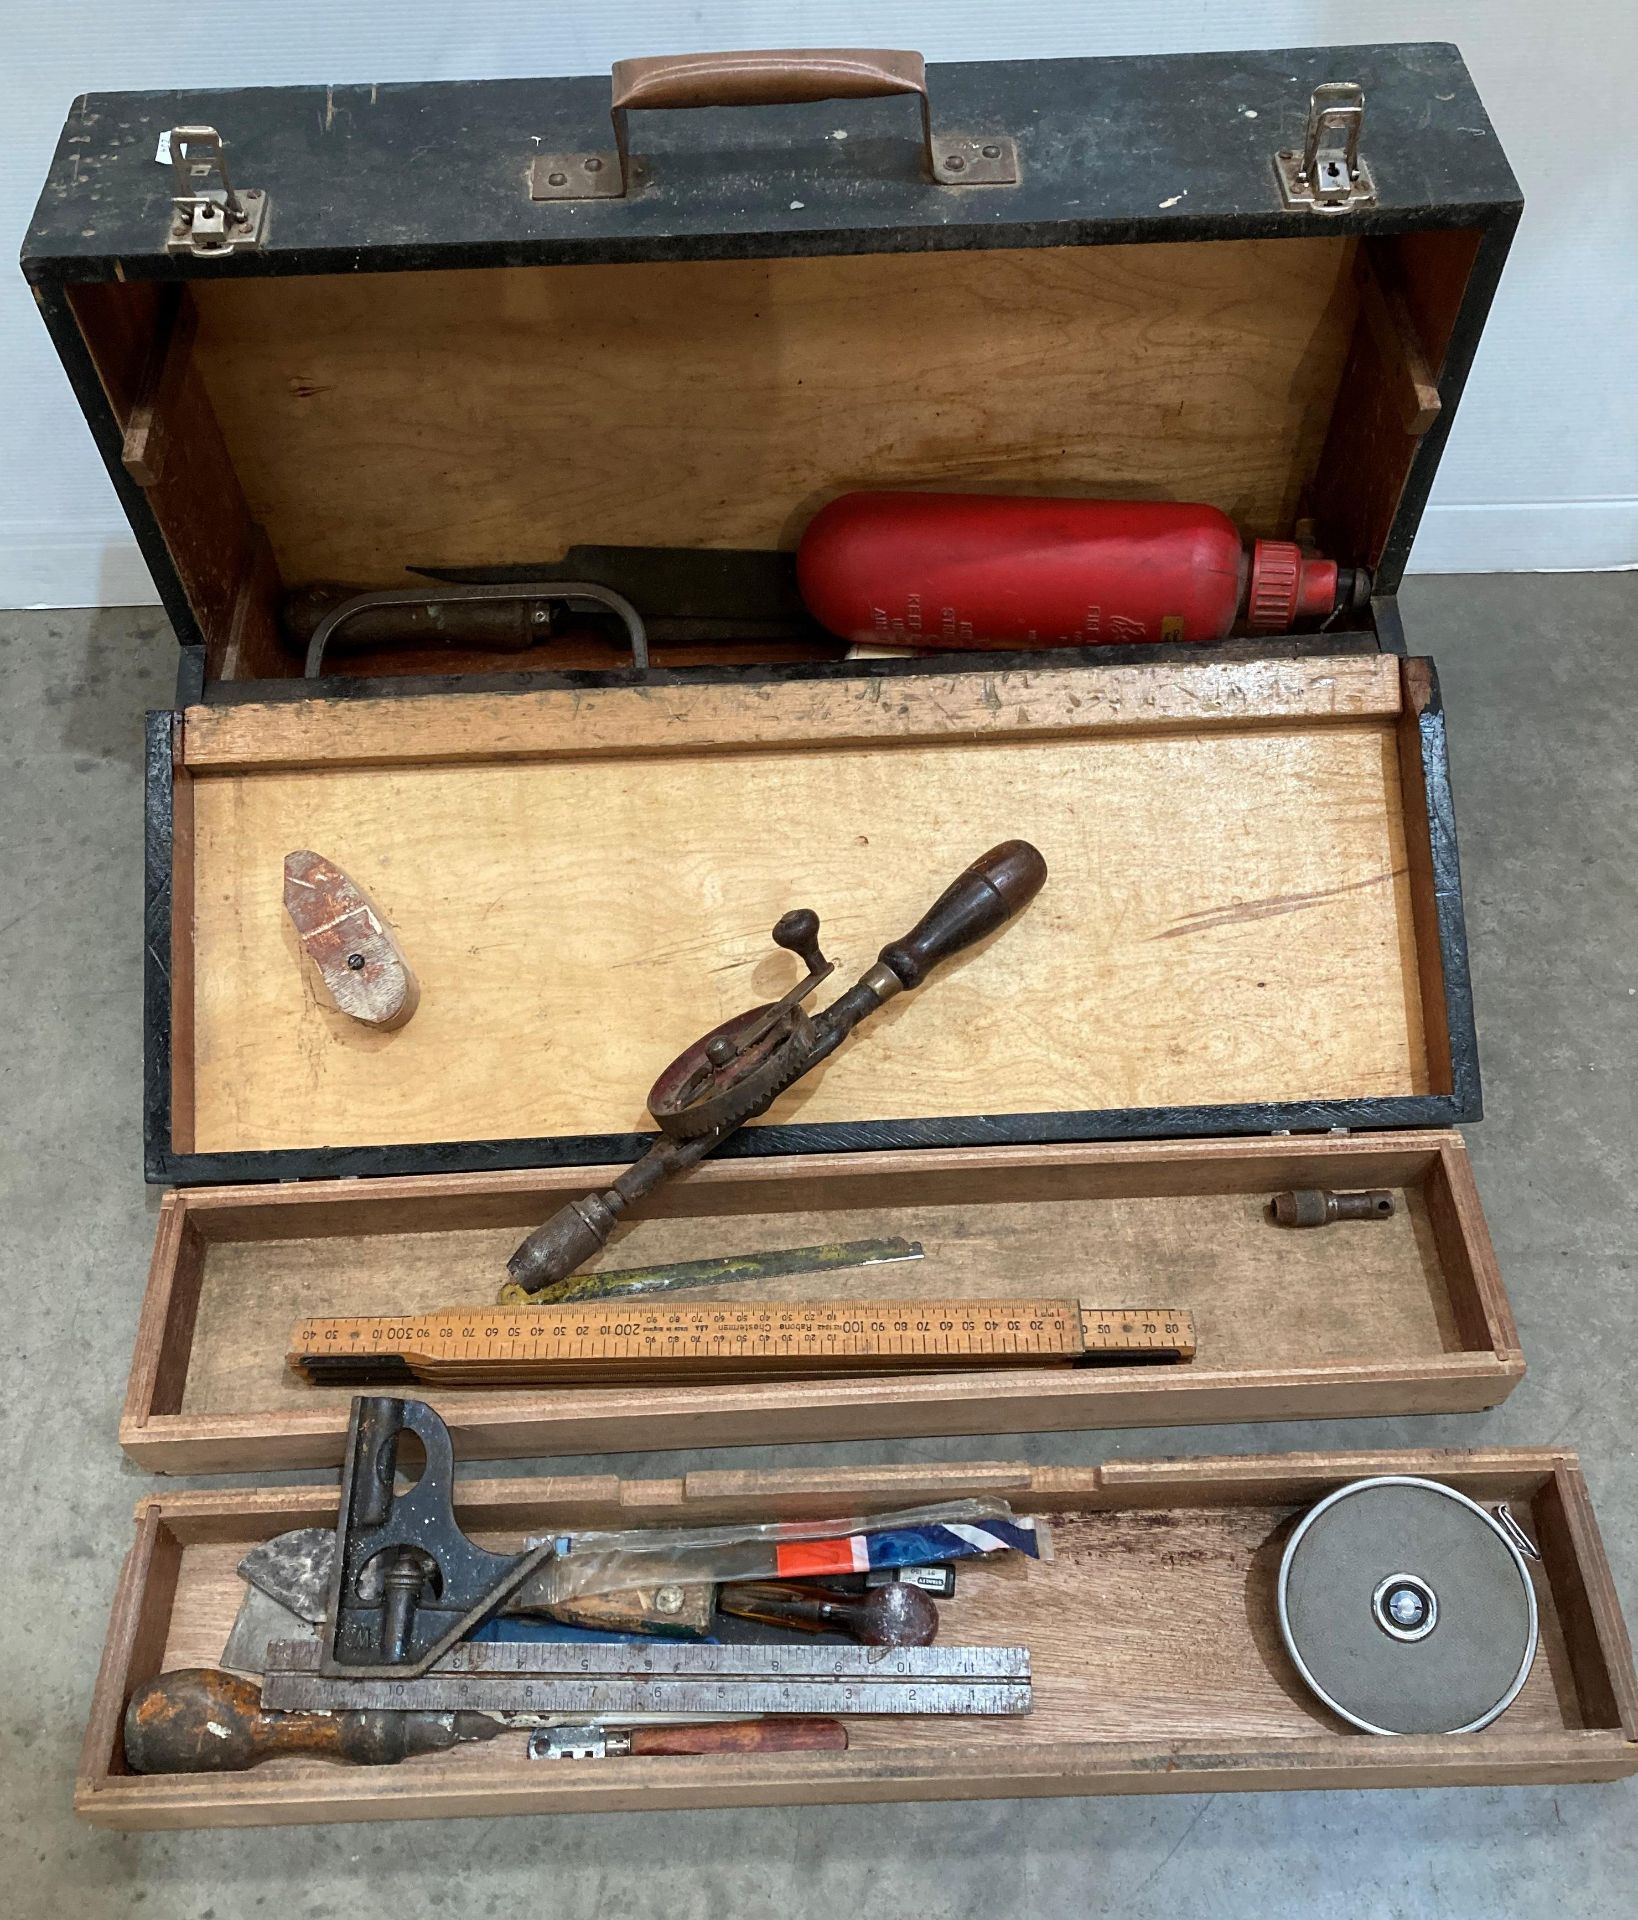 Vintage joiner's tool chest with drop front and two internal drawers with assorted hand tools - Image 2 of 2